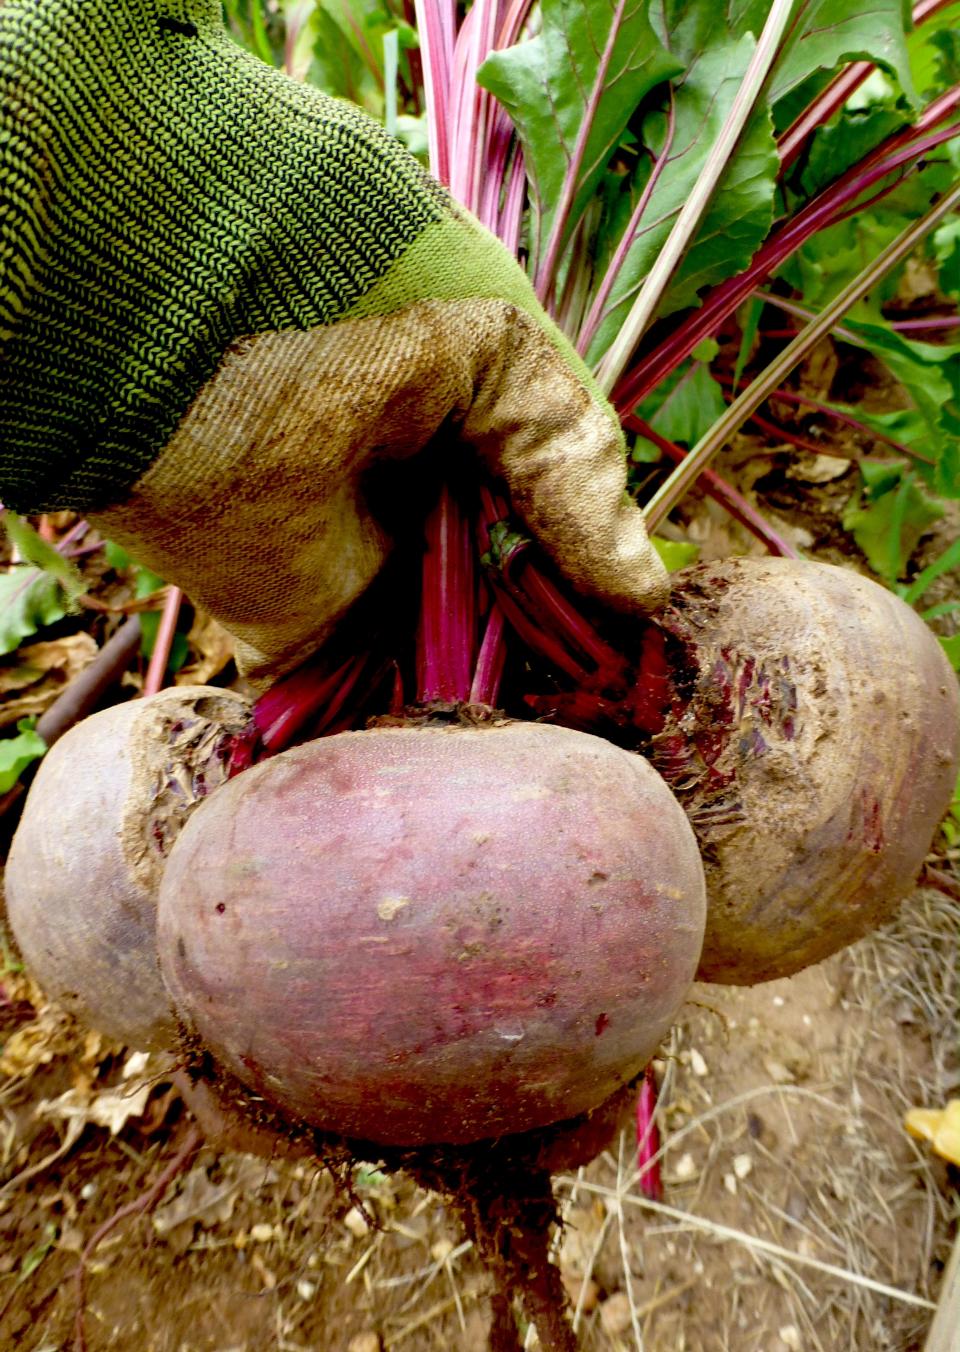 Red beets were planted in the spring and harvested as a summer crop when 4 inches in diameter. Roots were still tender at harvest by keeping them evenly moist throughout the growing season.